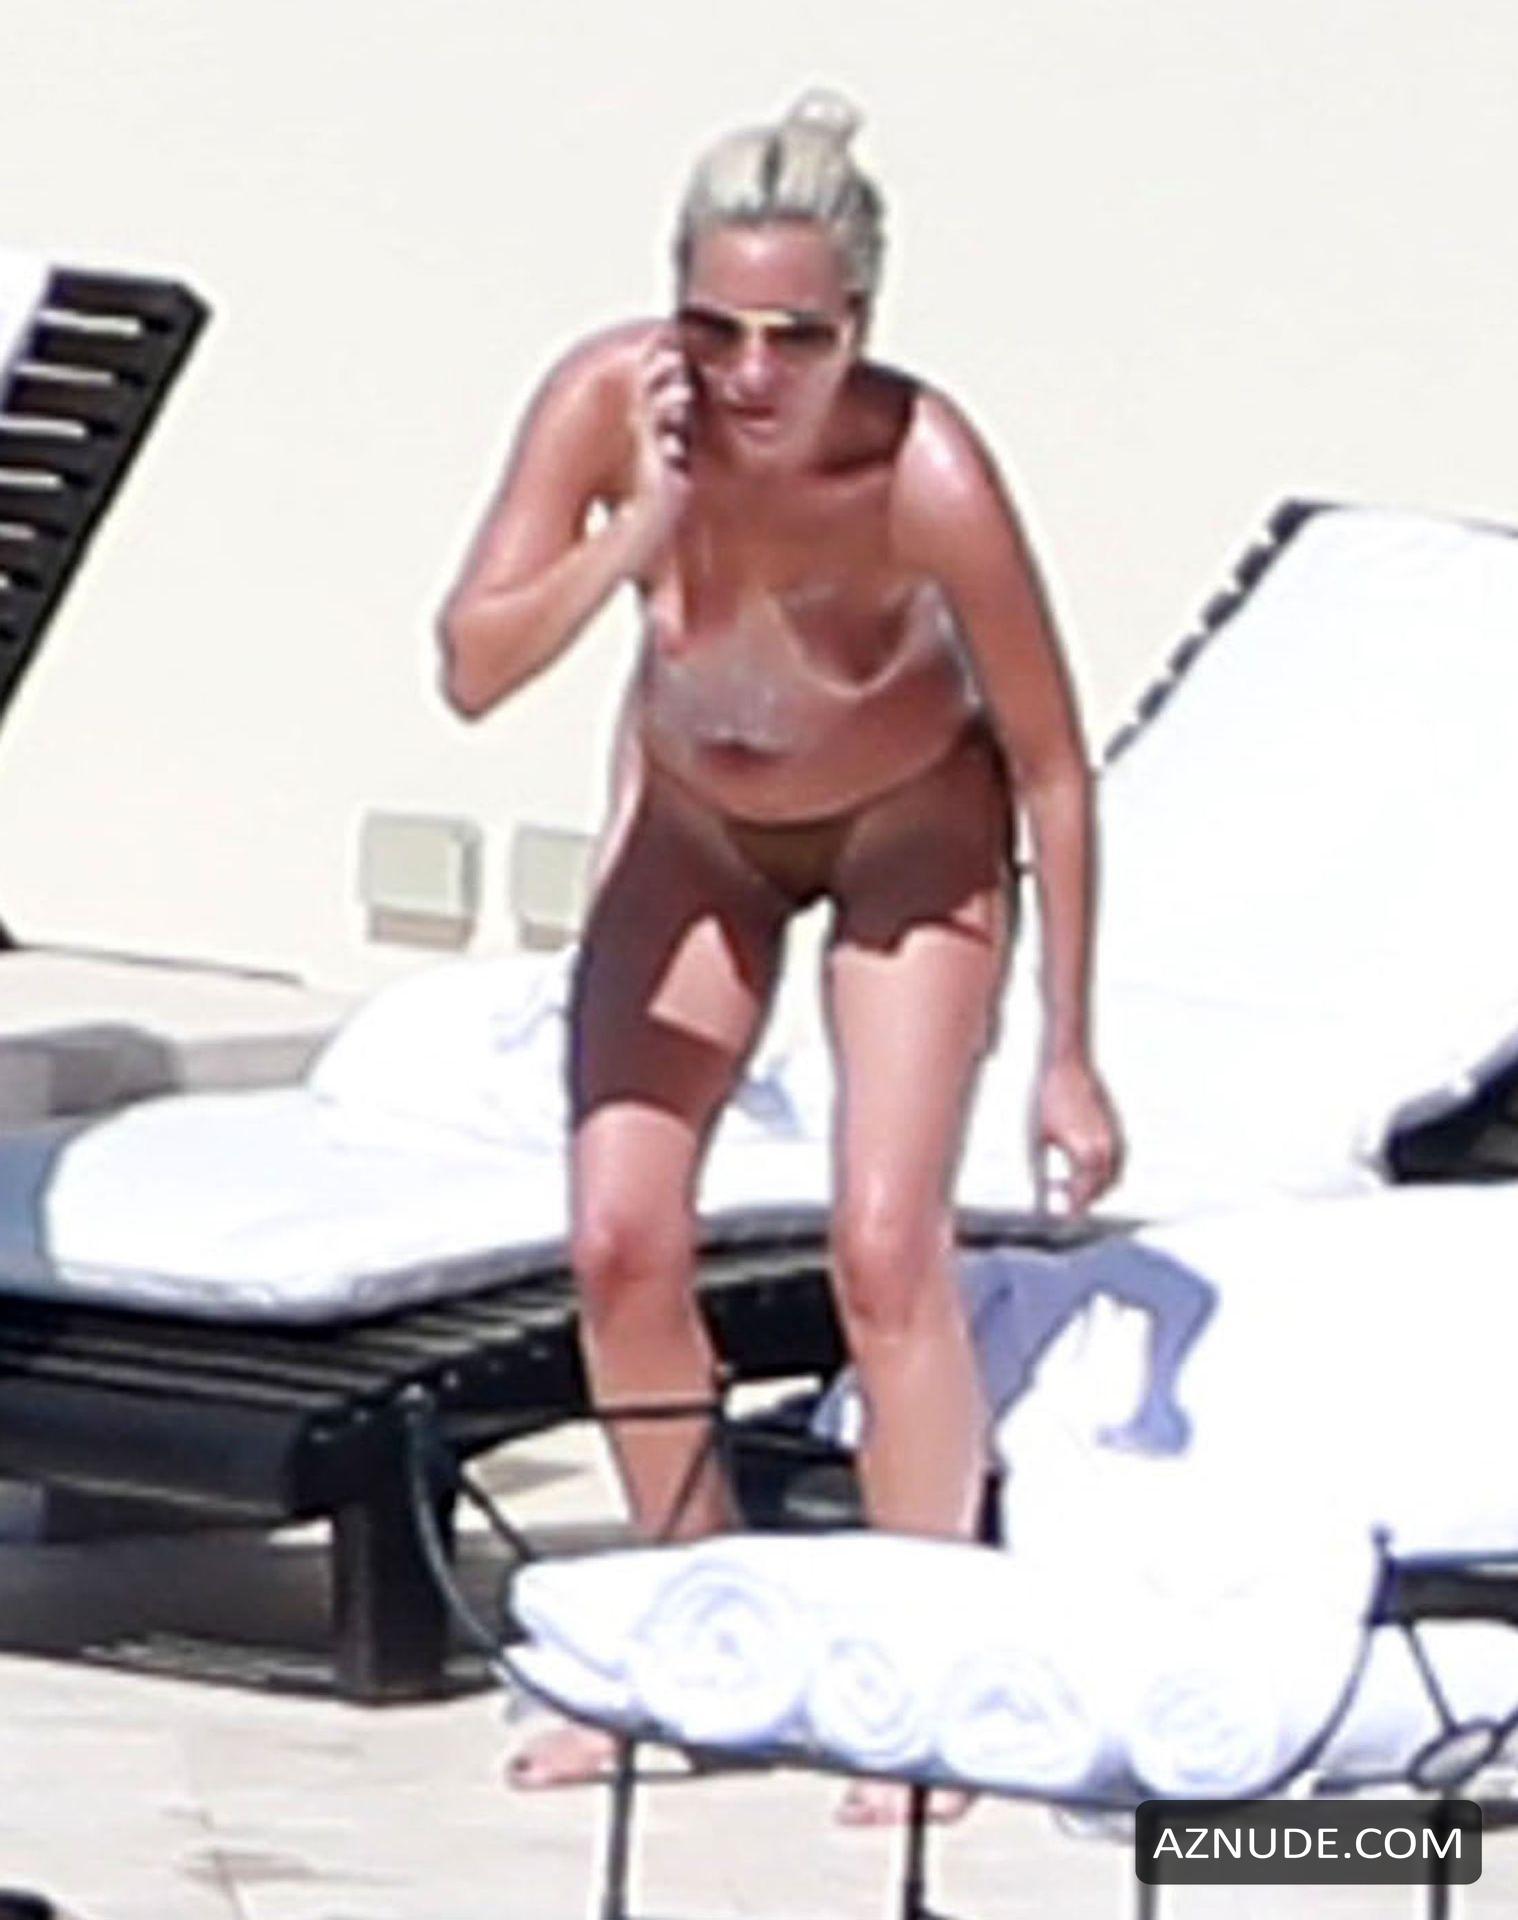 Lady Gaga Topless Sunbathing In Mexico With Friends 14 02